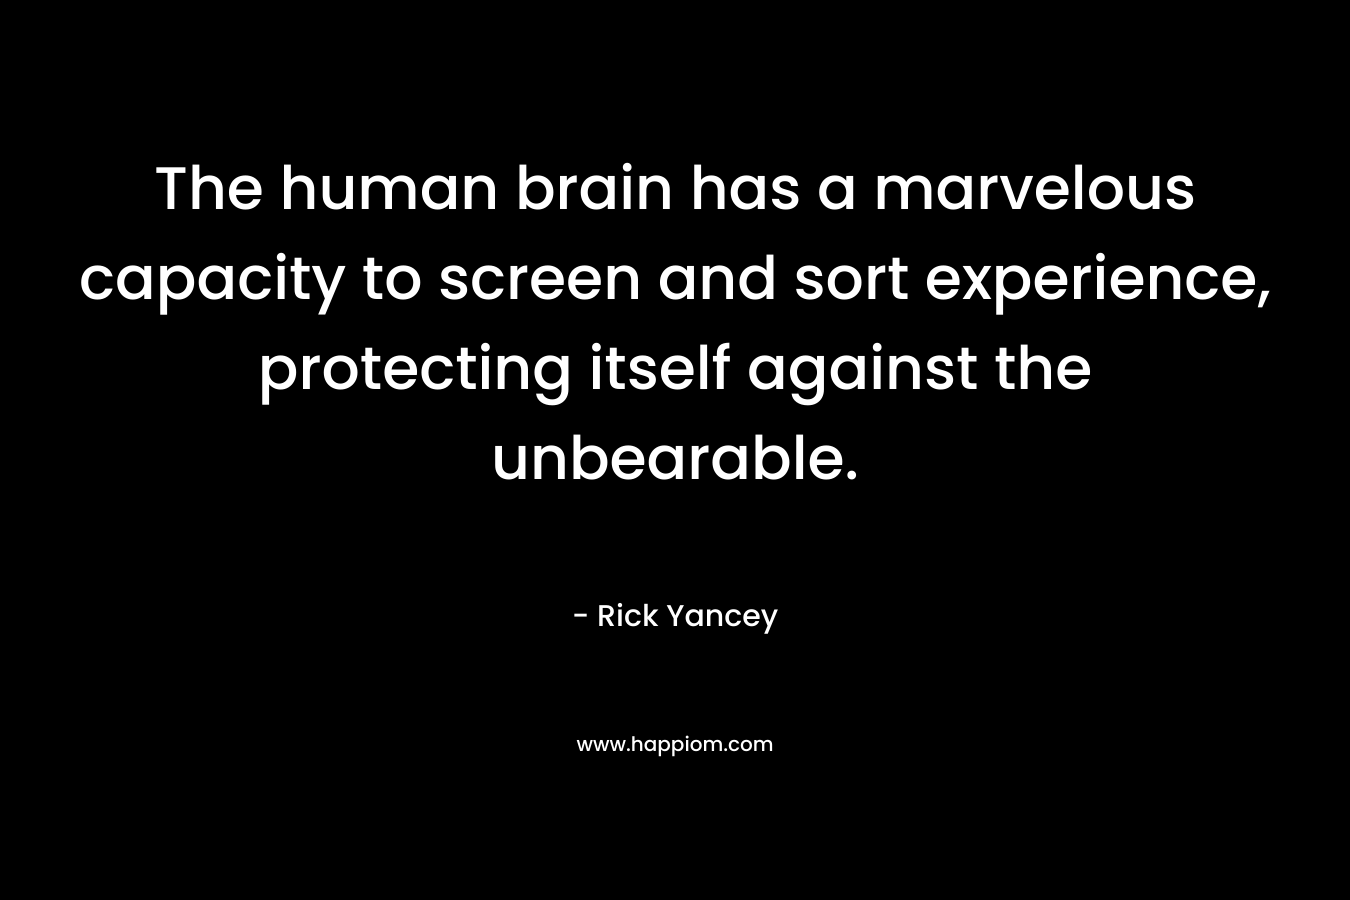 The human brain has a marvelous capacity to screen and sort experience, protecting itself against the unbearable.